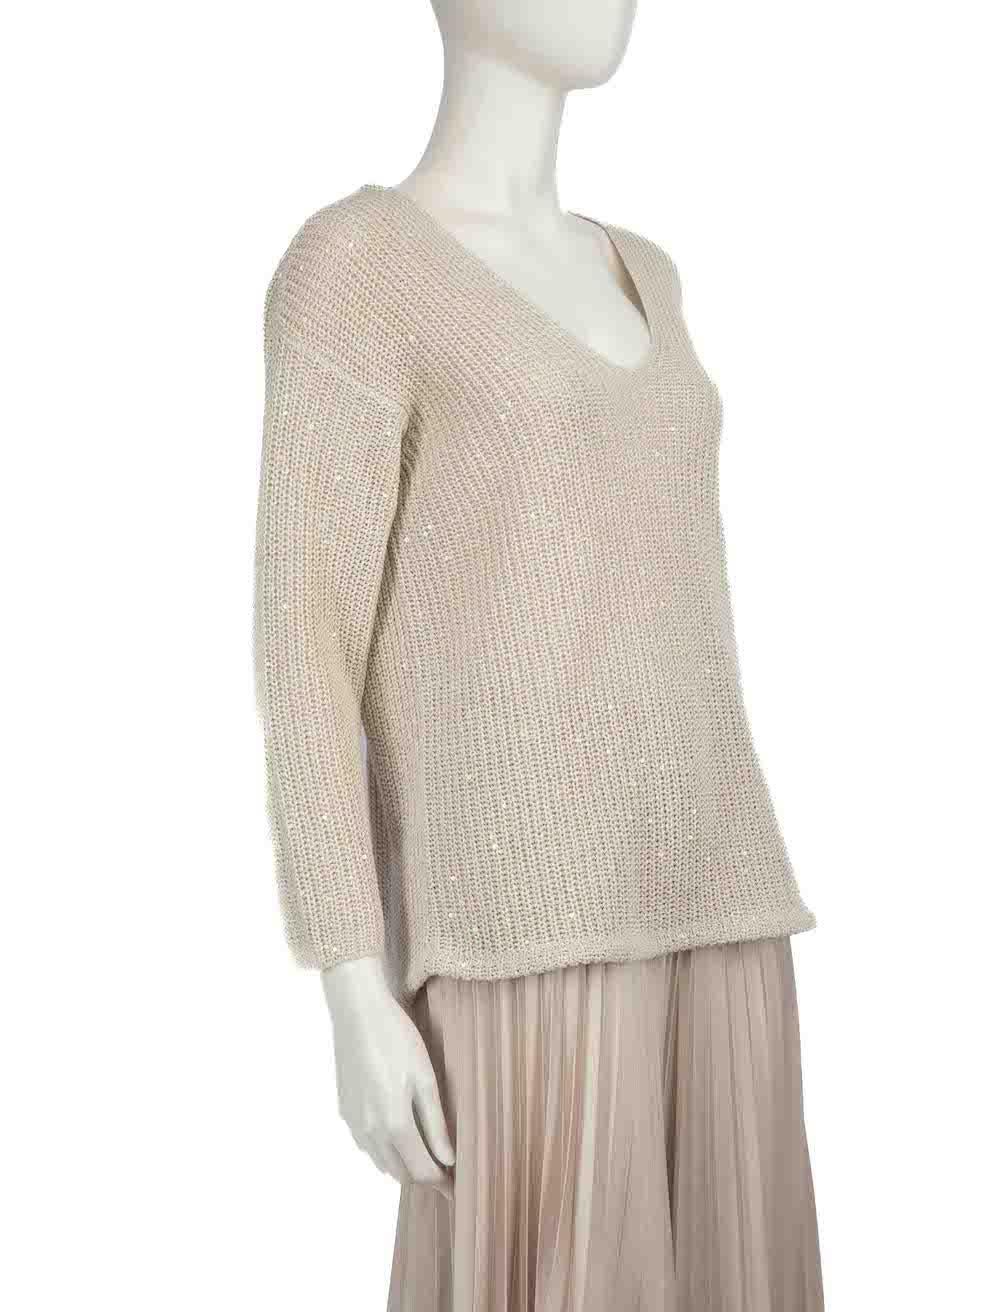 CONDITION is Very good. Hardly any visible wear to jumper is evident on this used Brunello Cucinello designer resale item.
 
 
 
 Details
 
 
 Ecru
 
 Cotton
 
 Knit jumper
 
 V-neck
 
 Sequinned accent
 
 Long sleeves
 
 
 
 
 
 Made in Italy
 
 
